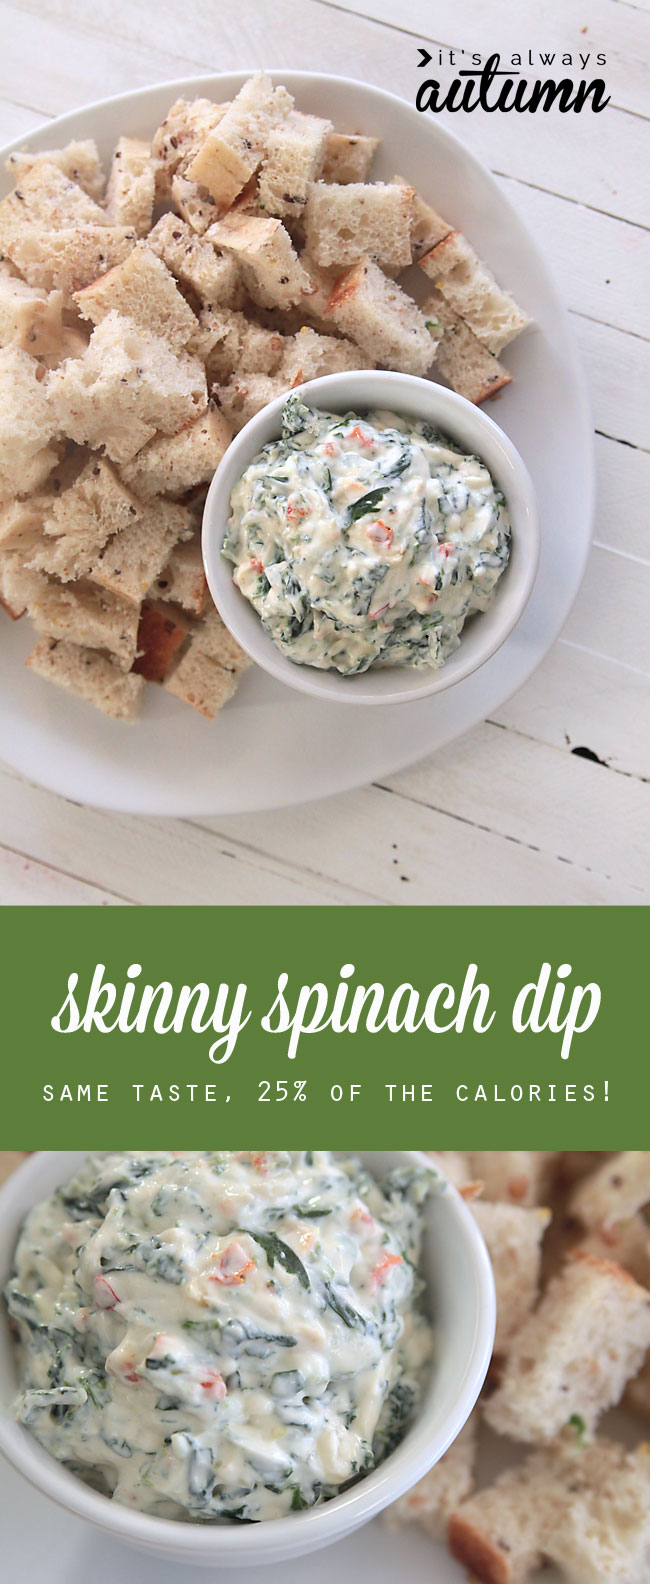 skinny spinach dip in a bowl with pieces of bread surrounding it